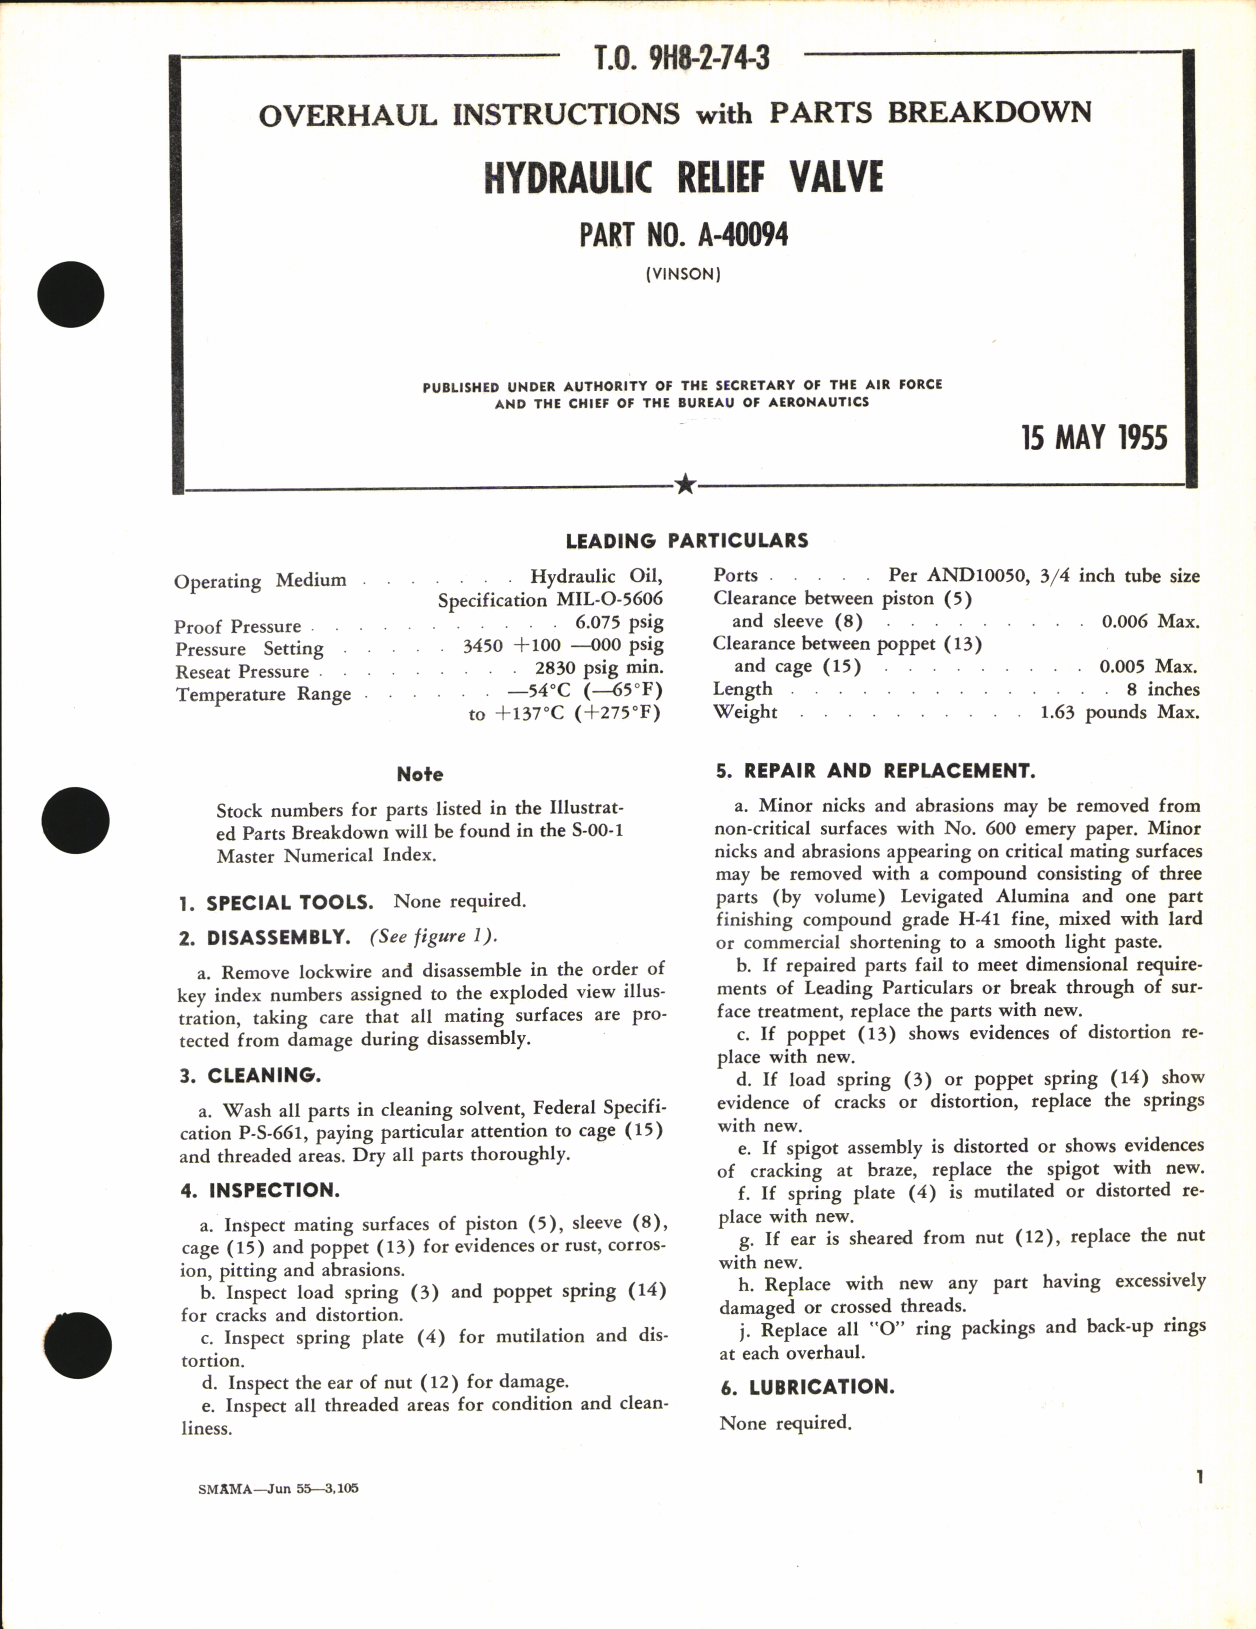 Sample page 1 from AirCorps Library document: Overhaul Instructions with Parts Breakdown for Hydraulic Relief Valve Part No. A-40094